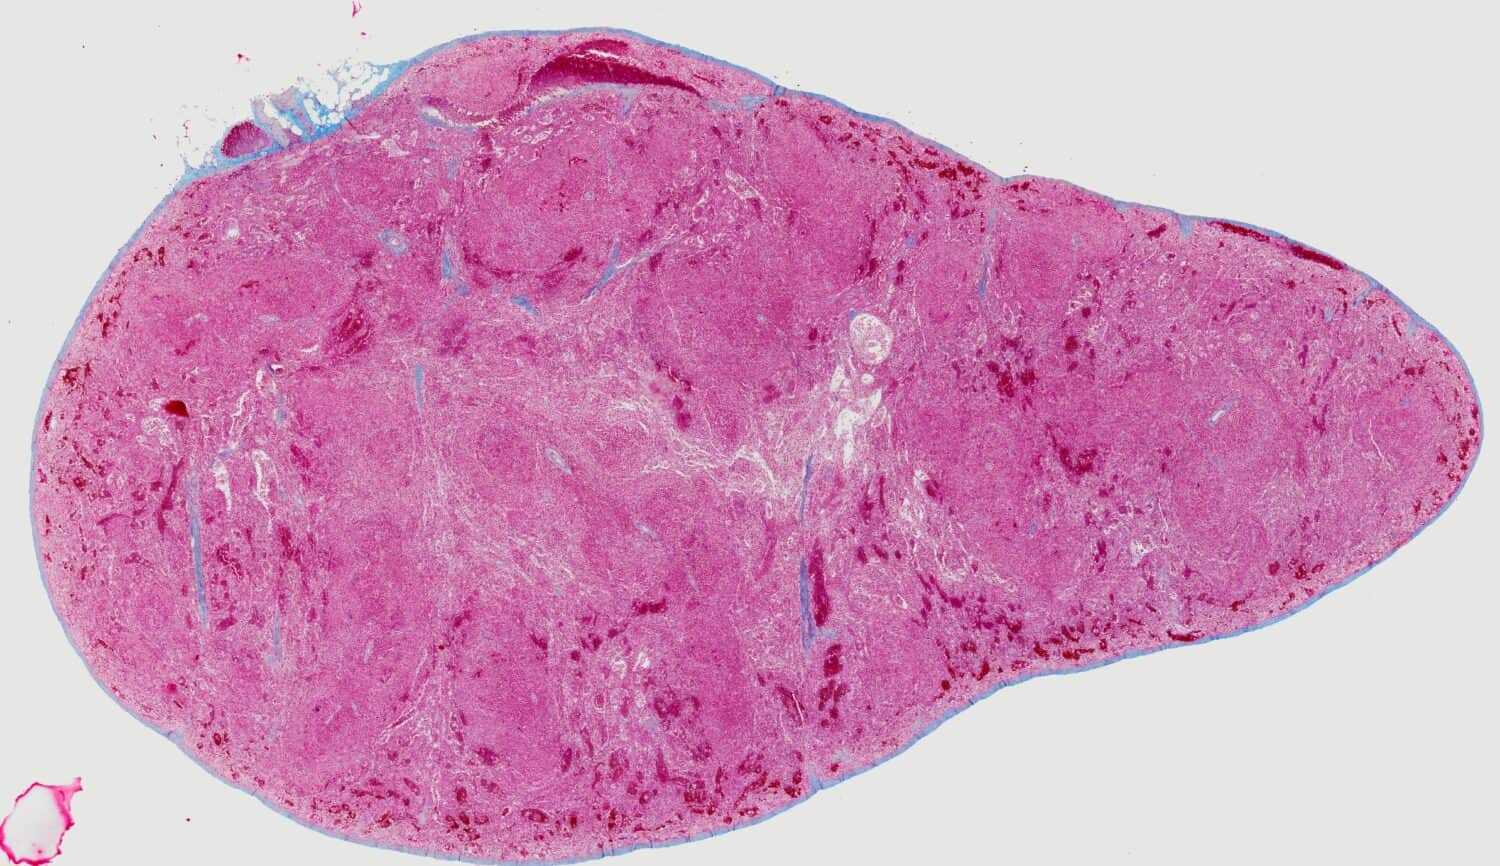 The spleen (shown here in cross-section with staining) is the largest organ in the lymphatic system.